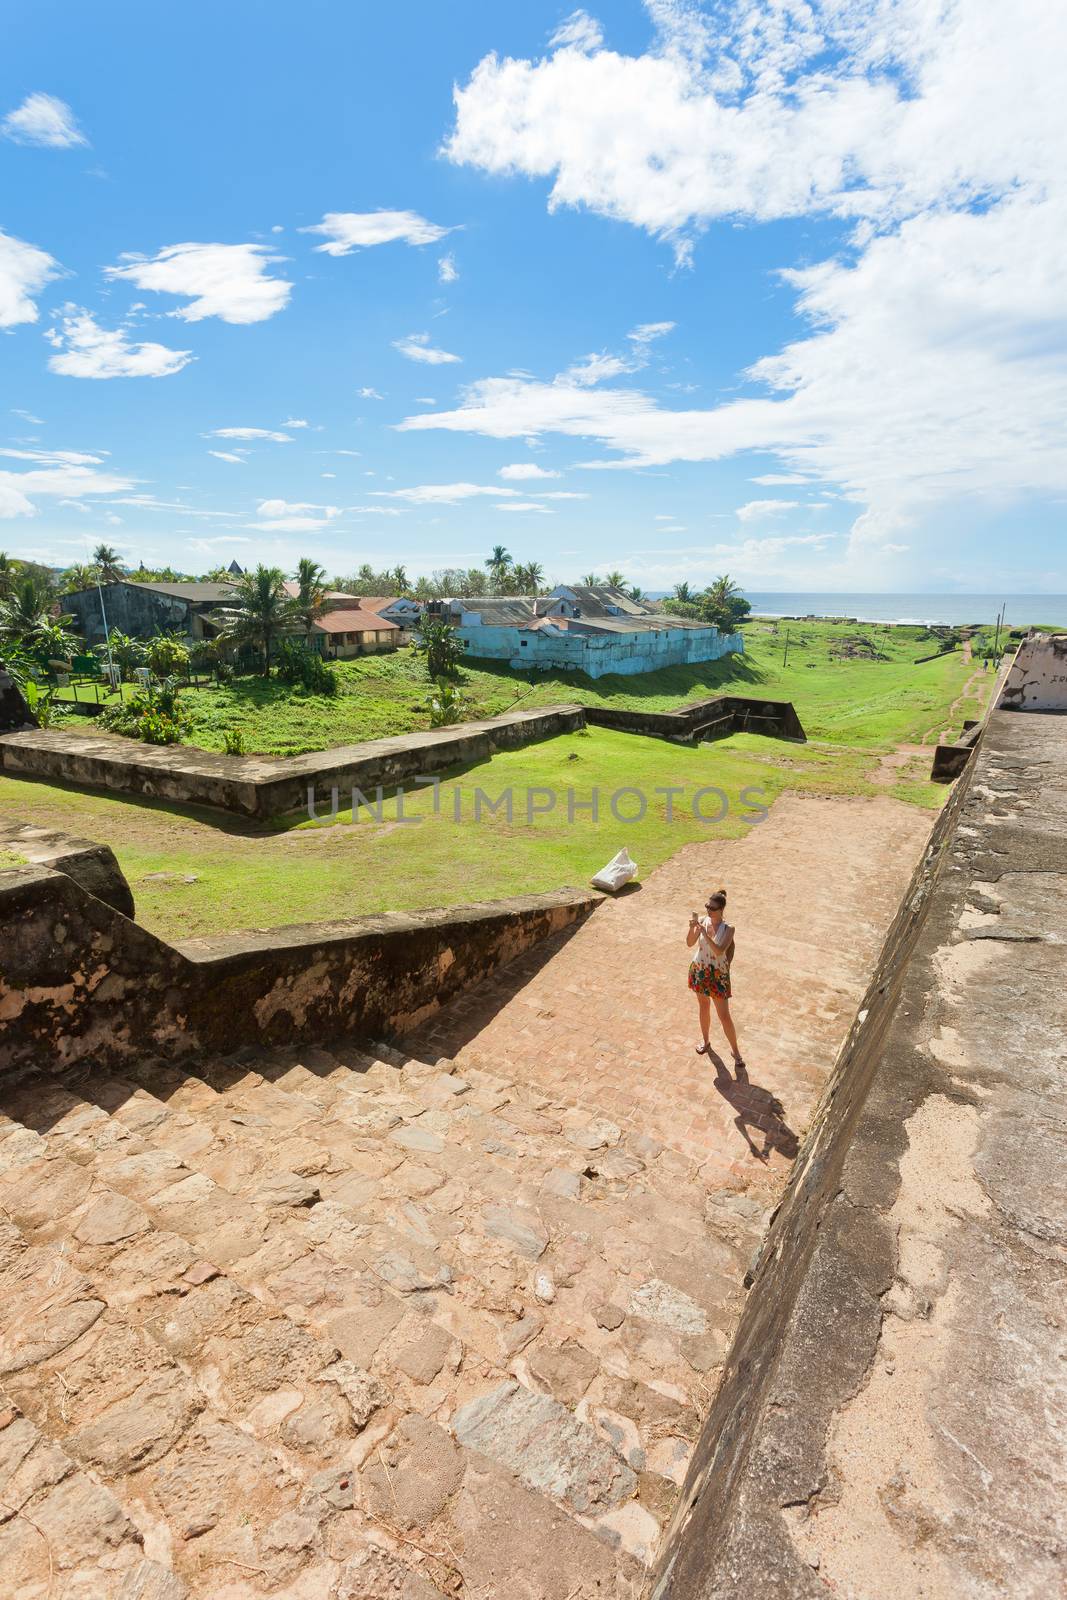 Sri Lanka, Asia, Galle - A woman visiting the medieval town wall of Galle